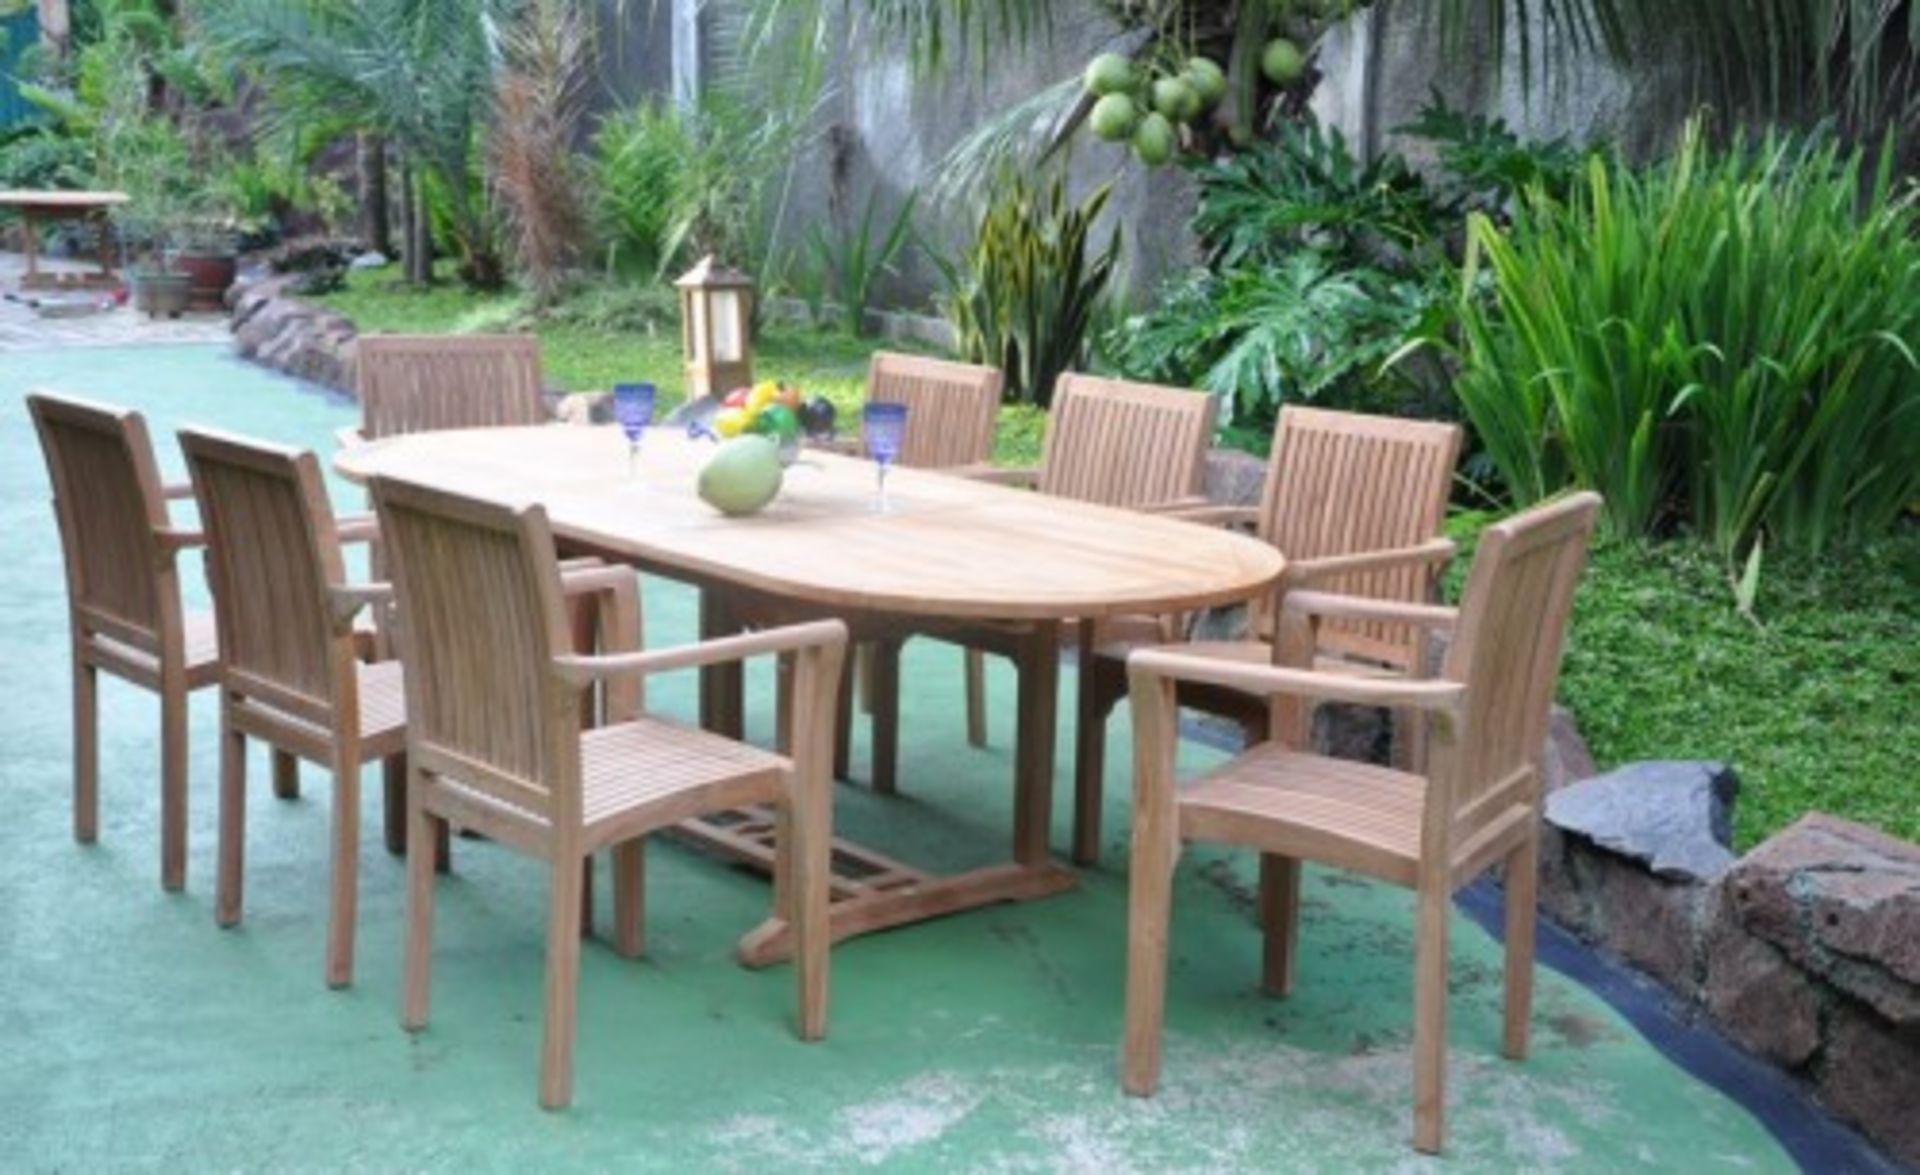 V Brand New Teak Extended Oval Table Set Allows For Up To 8 People including 8 stacking chairs /